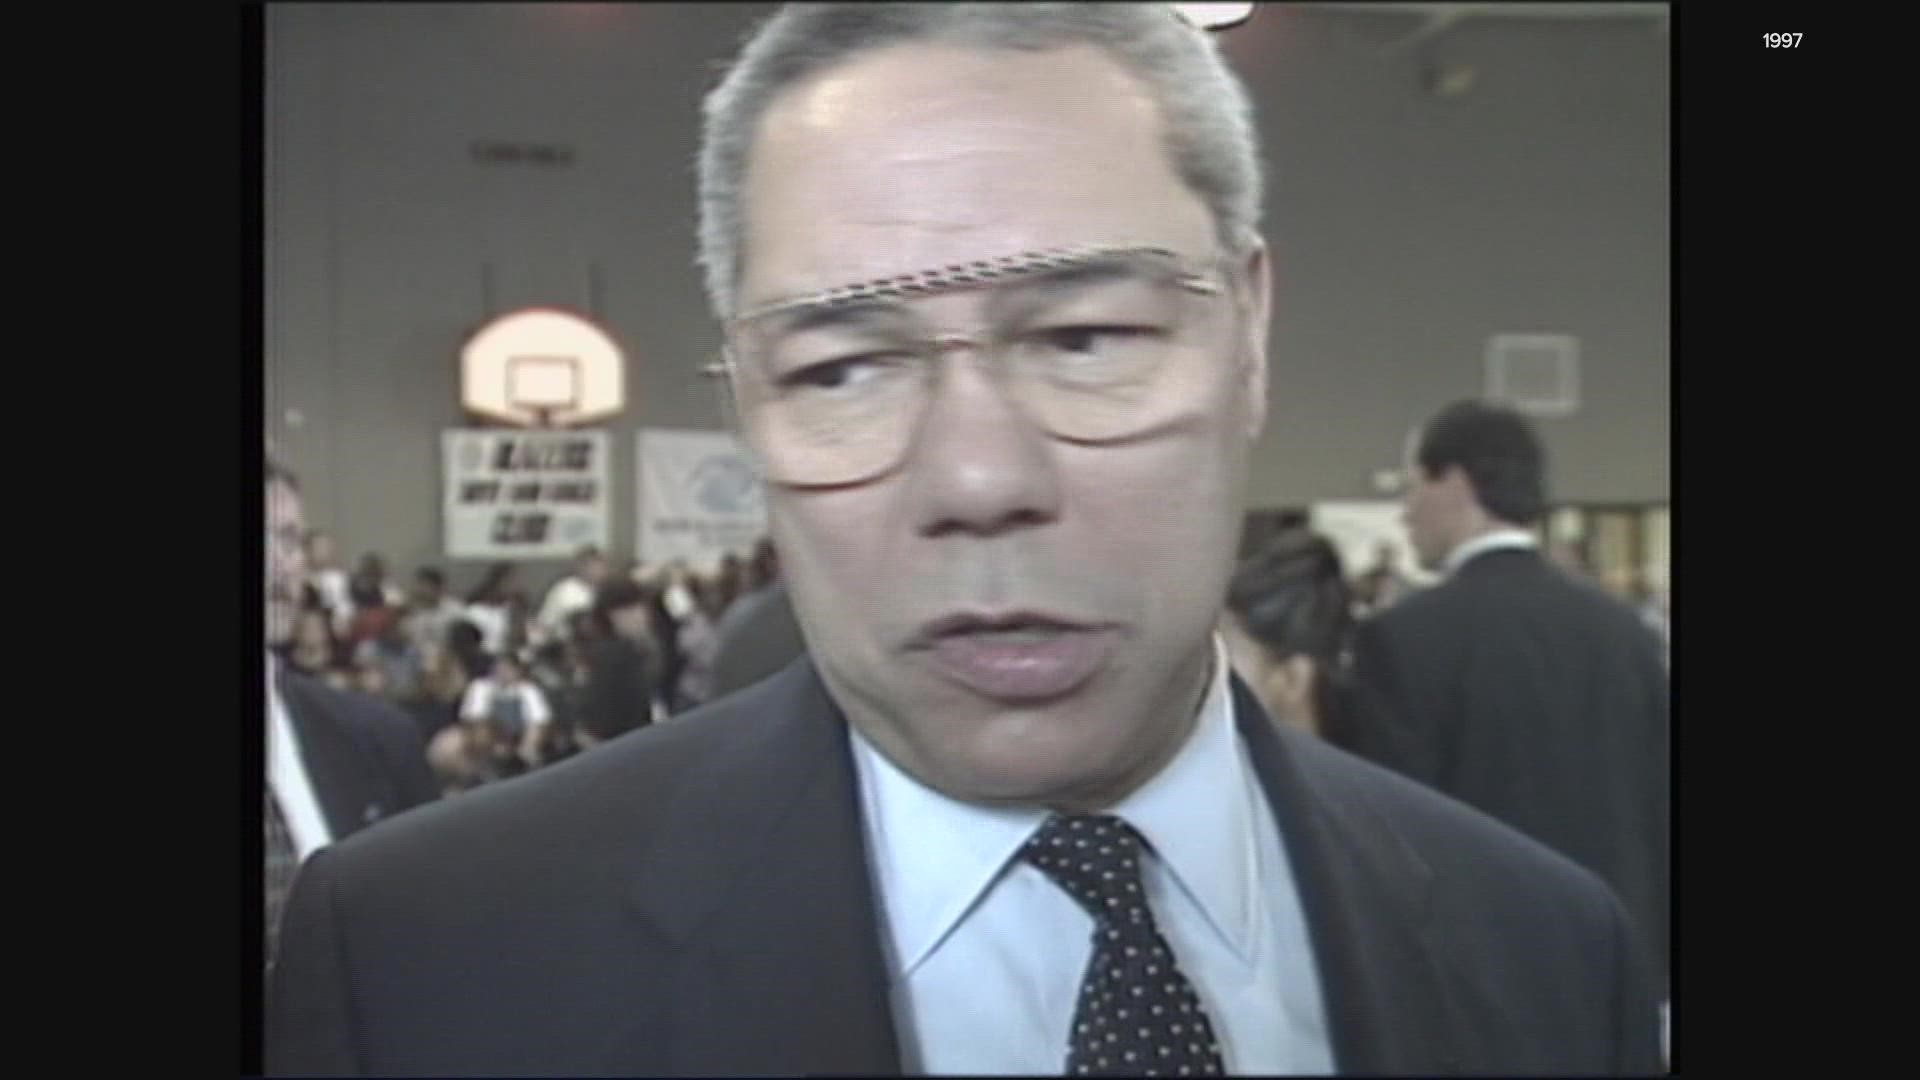 Former Secretary of State Colin Powell visited Portland in 1997 and spoke to a crowd of children at the Boys and Girls Club in Northeast.